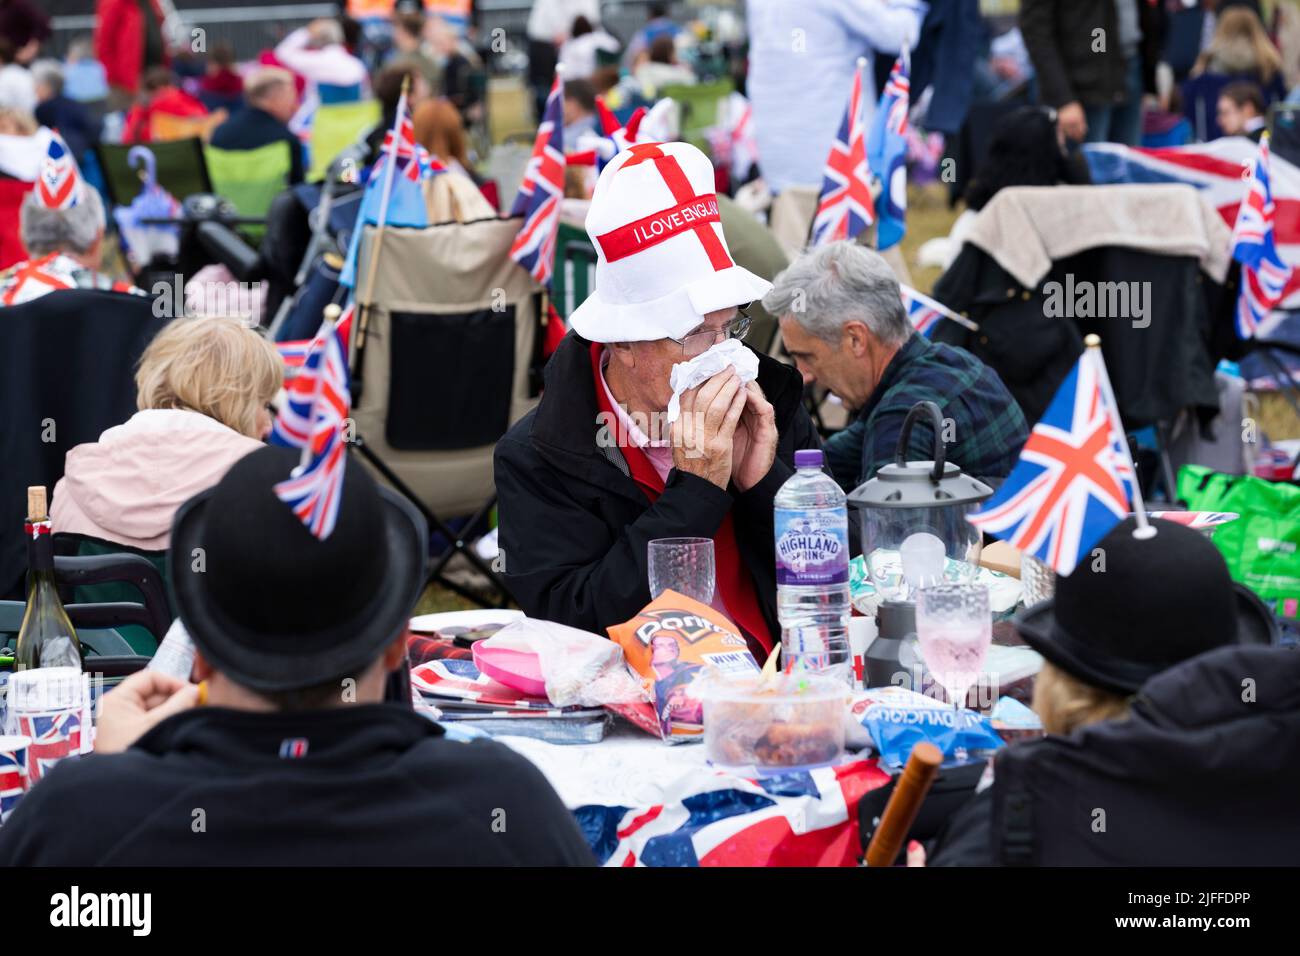 Woodstock, Oxfordshire, UK. 2nd July 2022. Man in hat with 'I love england' and Red Ensign. Battle Prom Picnic Concerts. Blenheim Palace. United Kingdom. Credit: Alexander Caminada/Alamy Live News Stock Photo